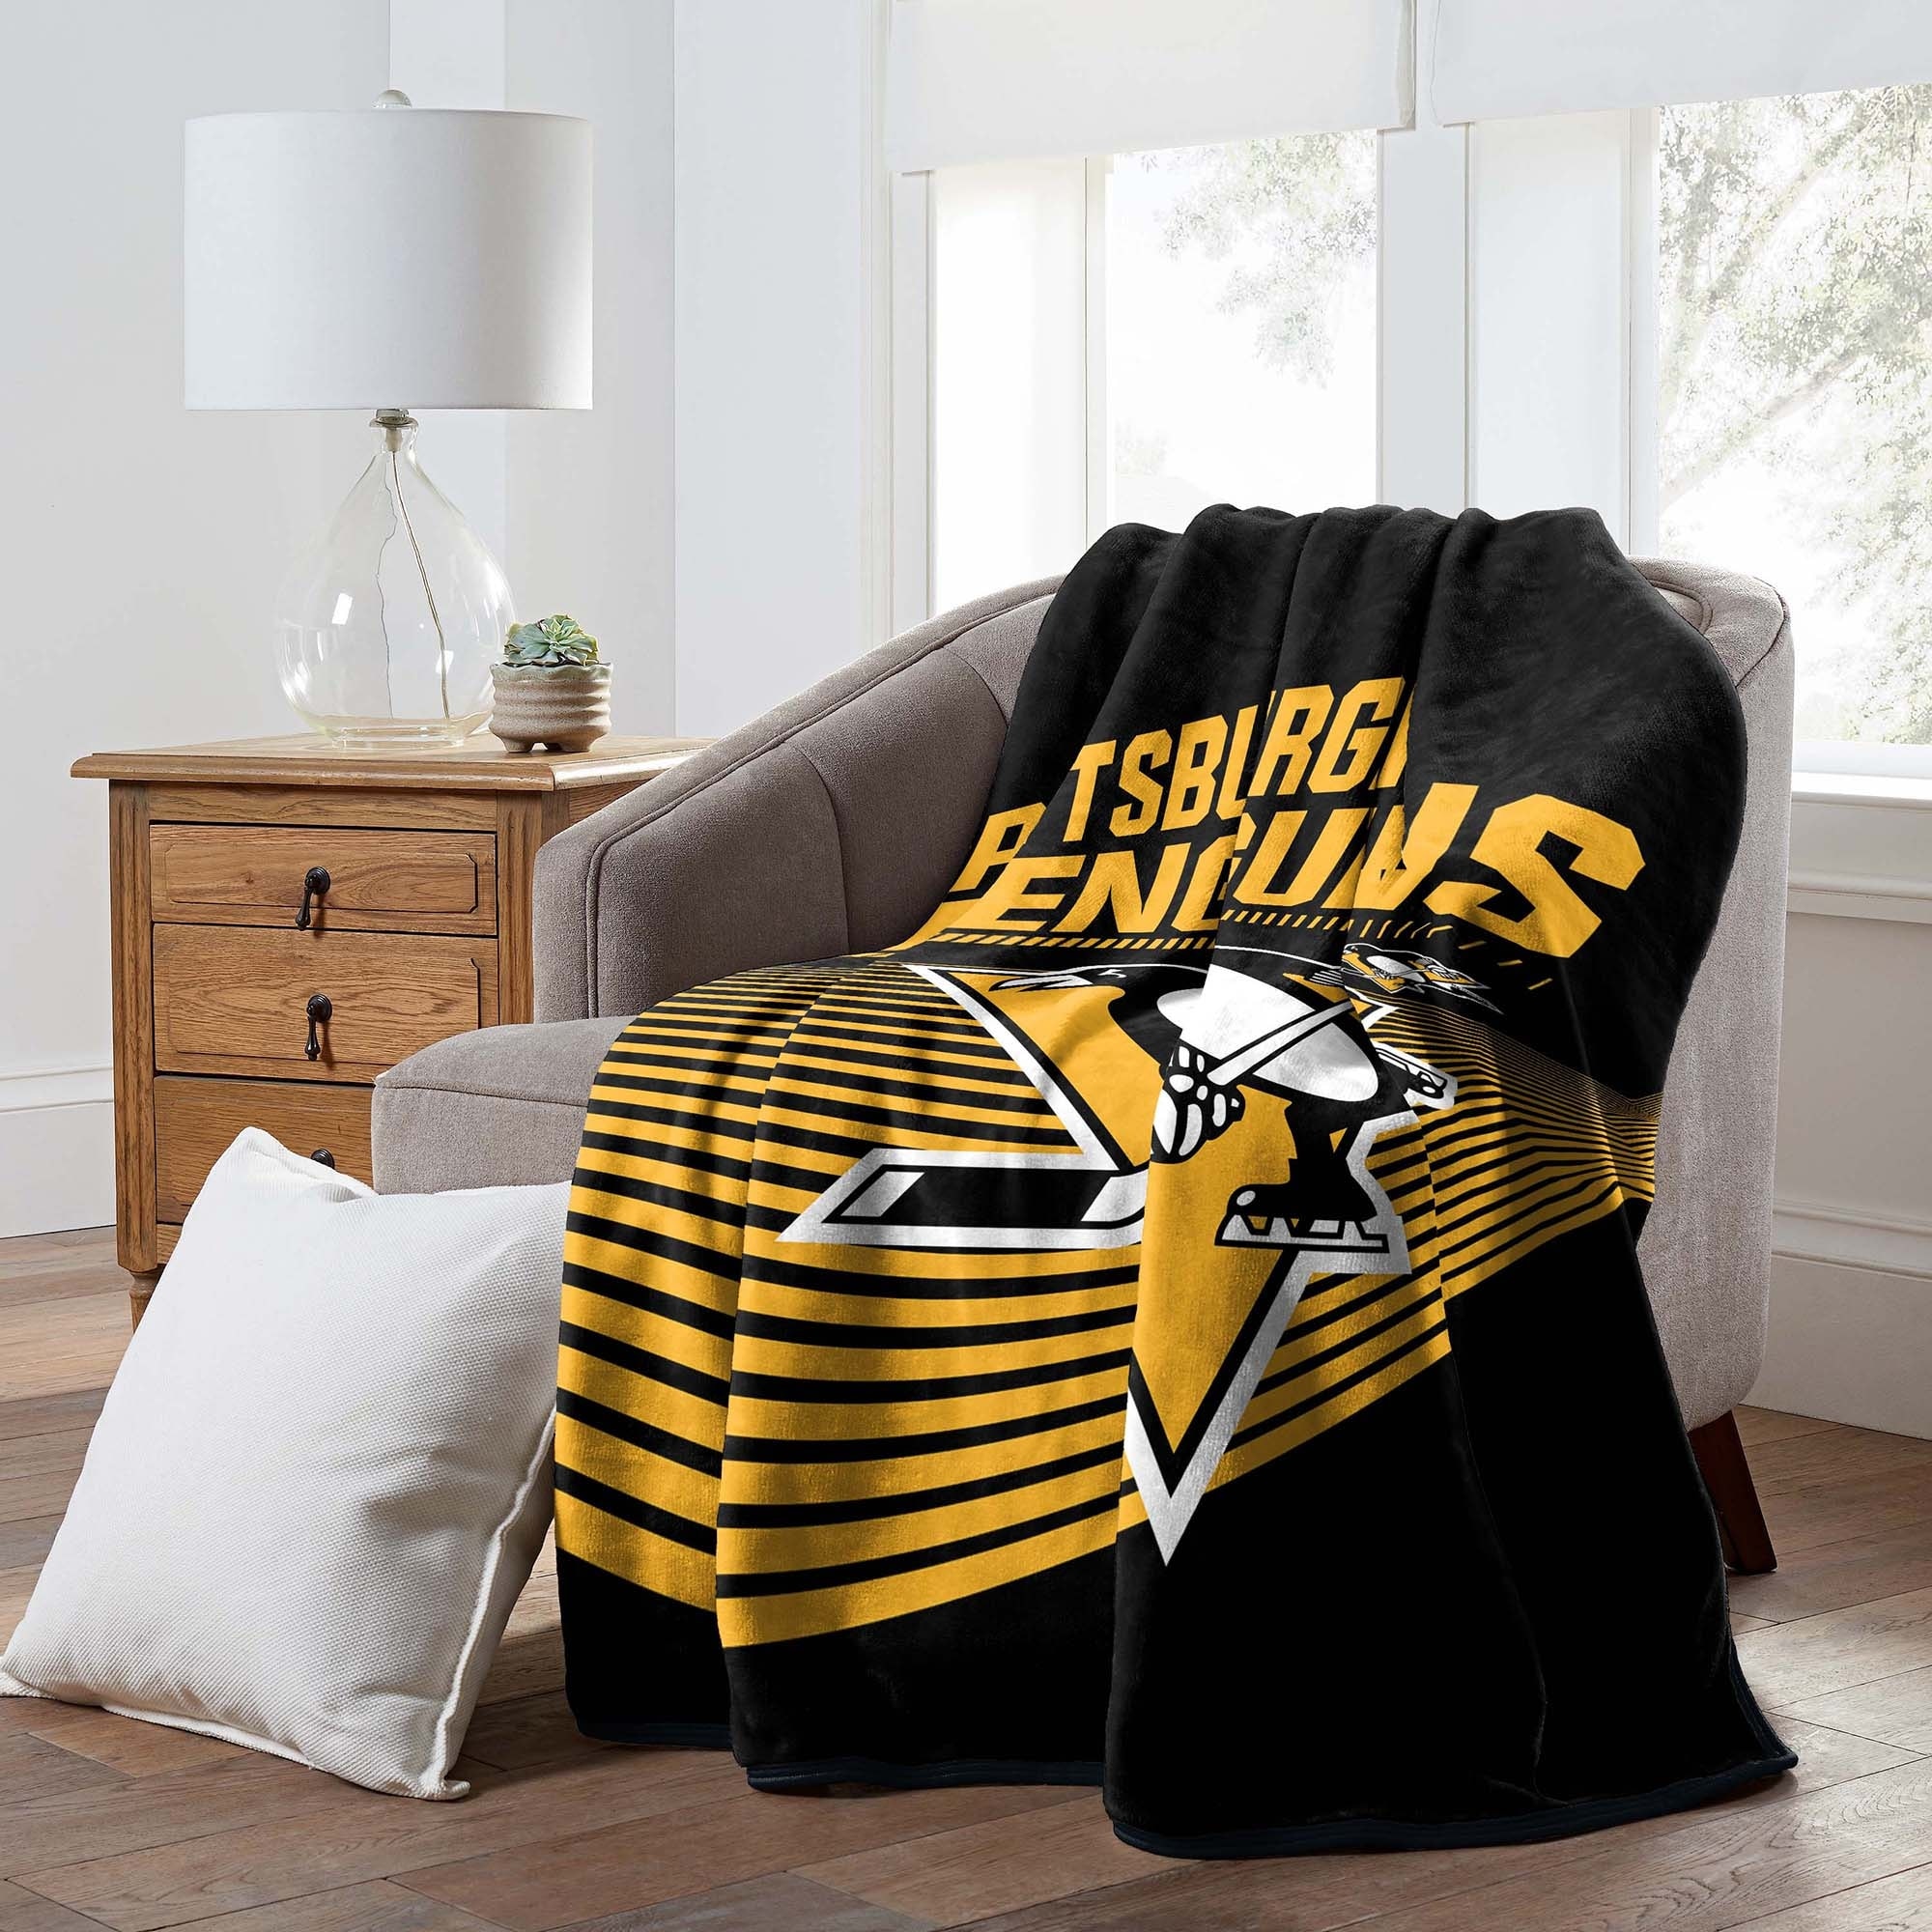 Officially Licensed NHL Twin Bed In a Bag Set - St Louis Blues